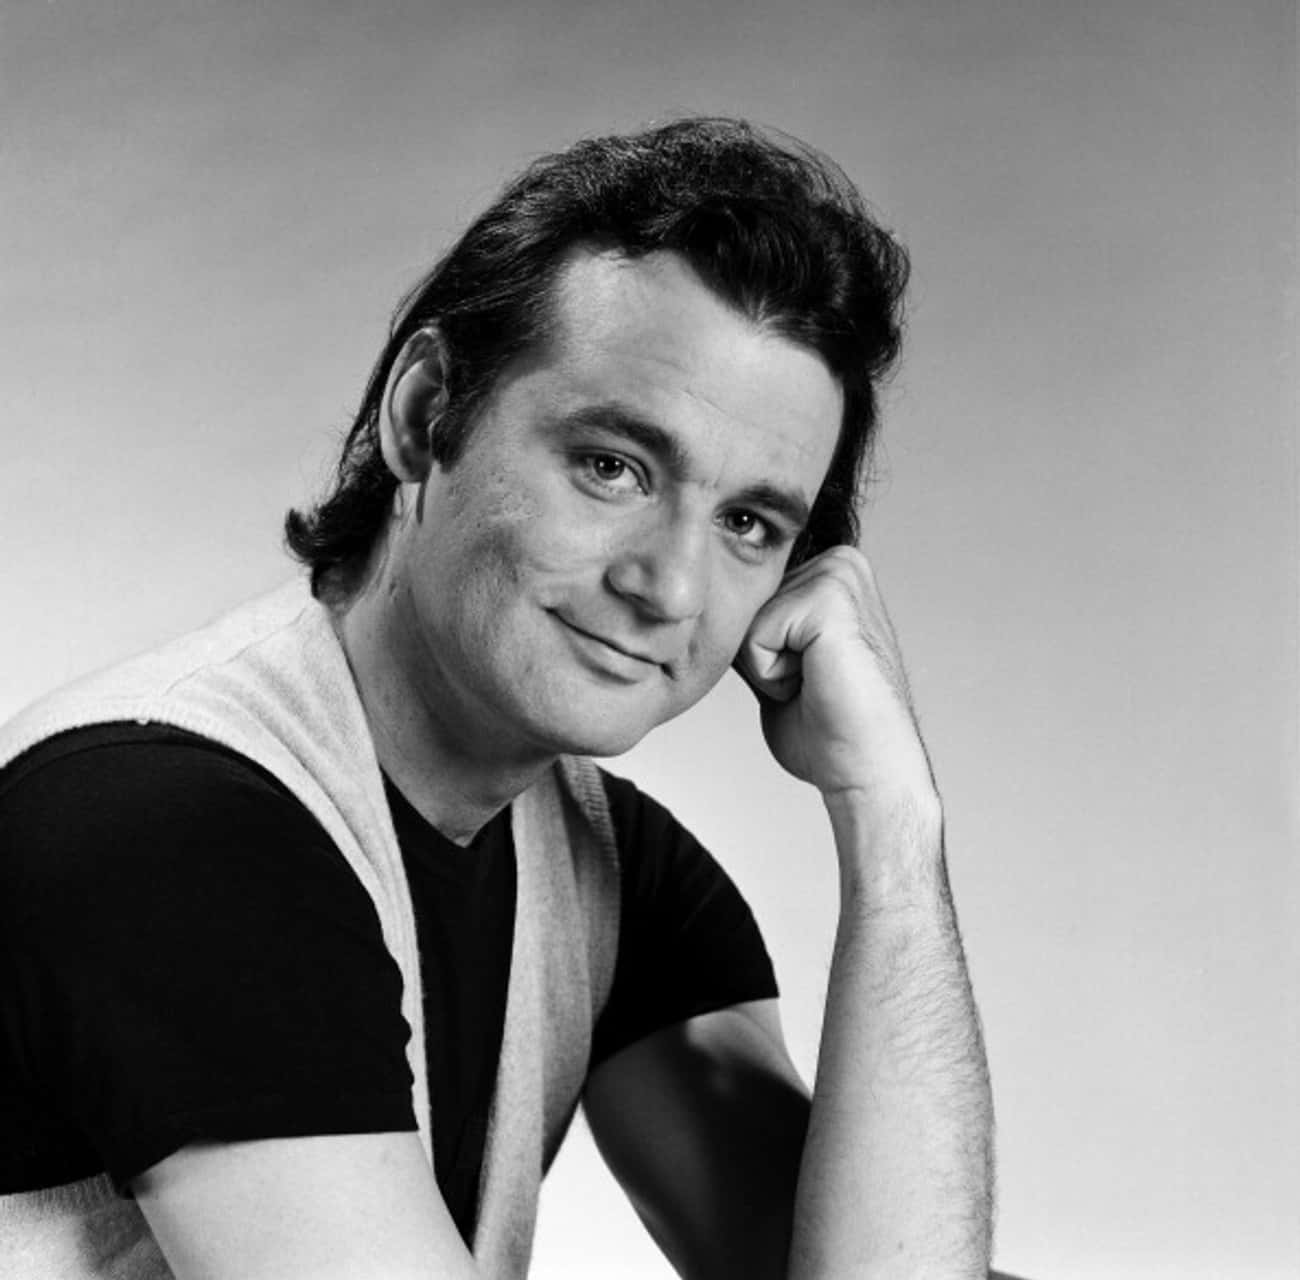 Young Bill Murray in a Black T-Shirt and White Vest